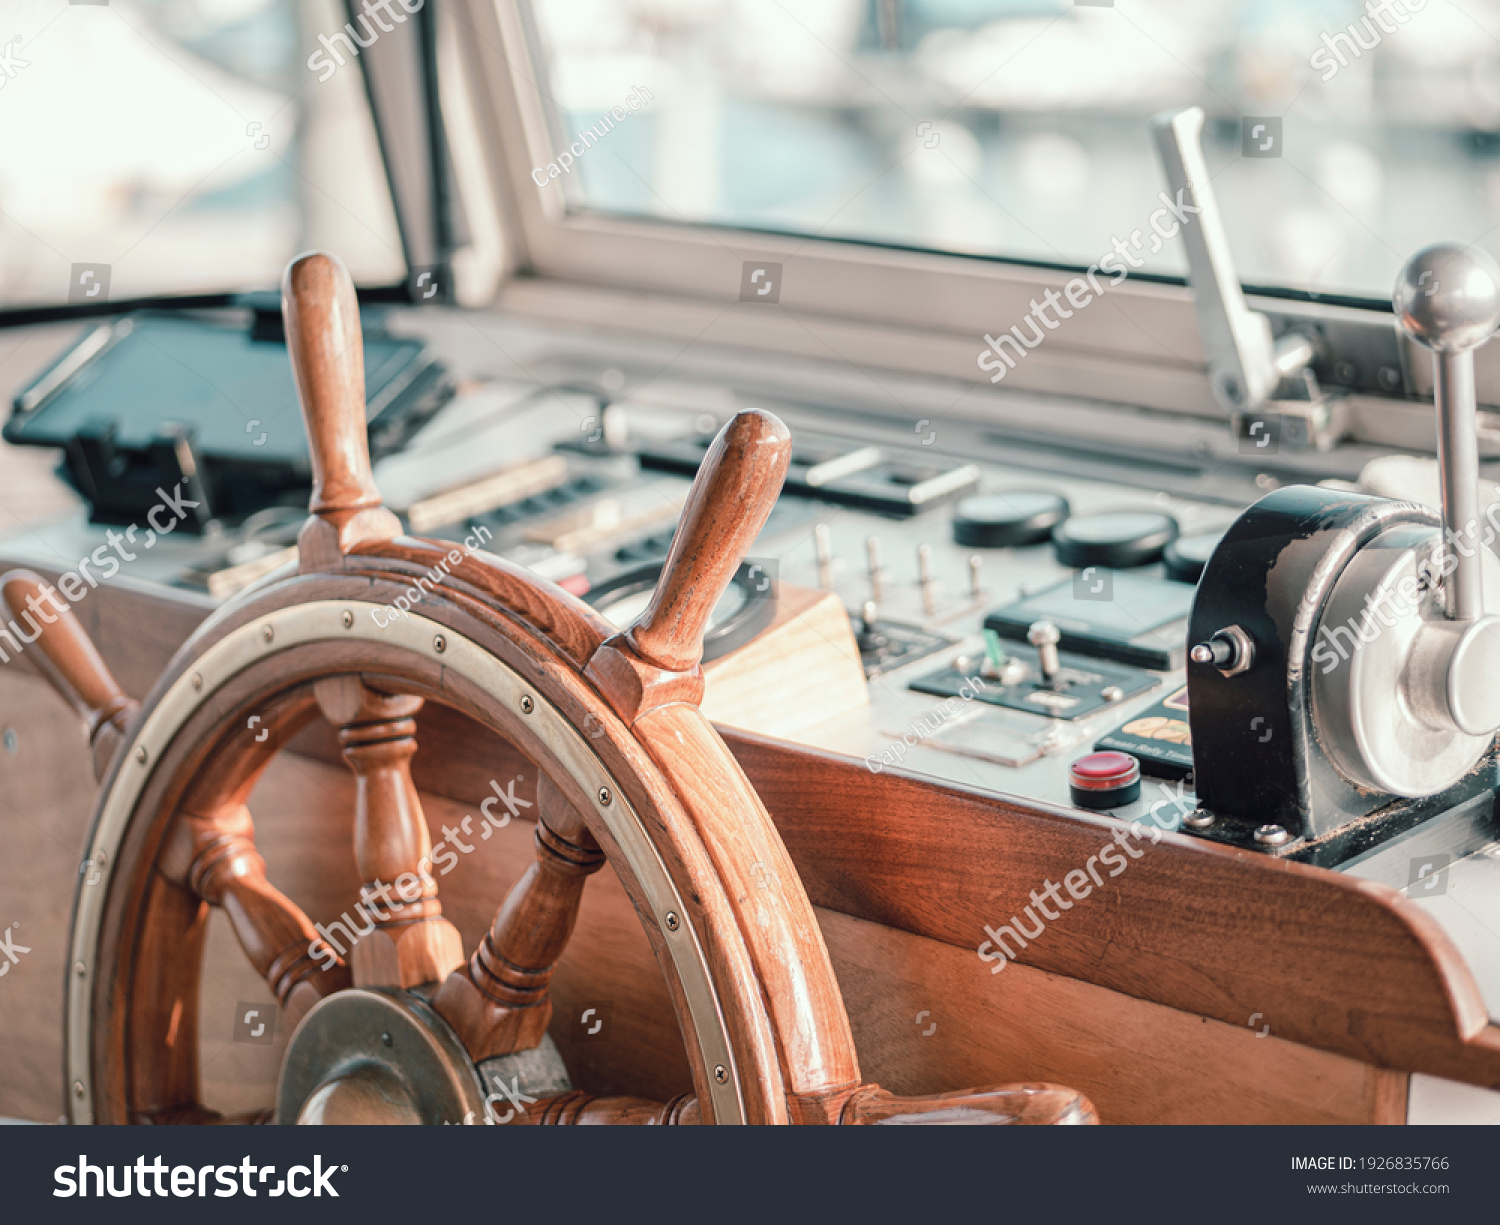 Close up of the interior of a large motor boat. The steering wheel and motor controls can be seen and the boat harbor slurred through the glass boat window. #1926835766